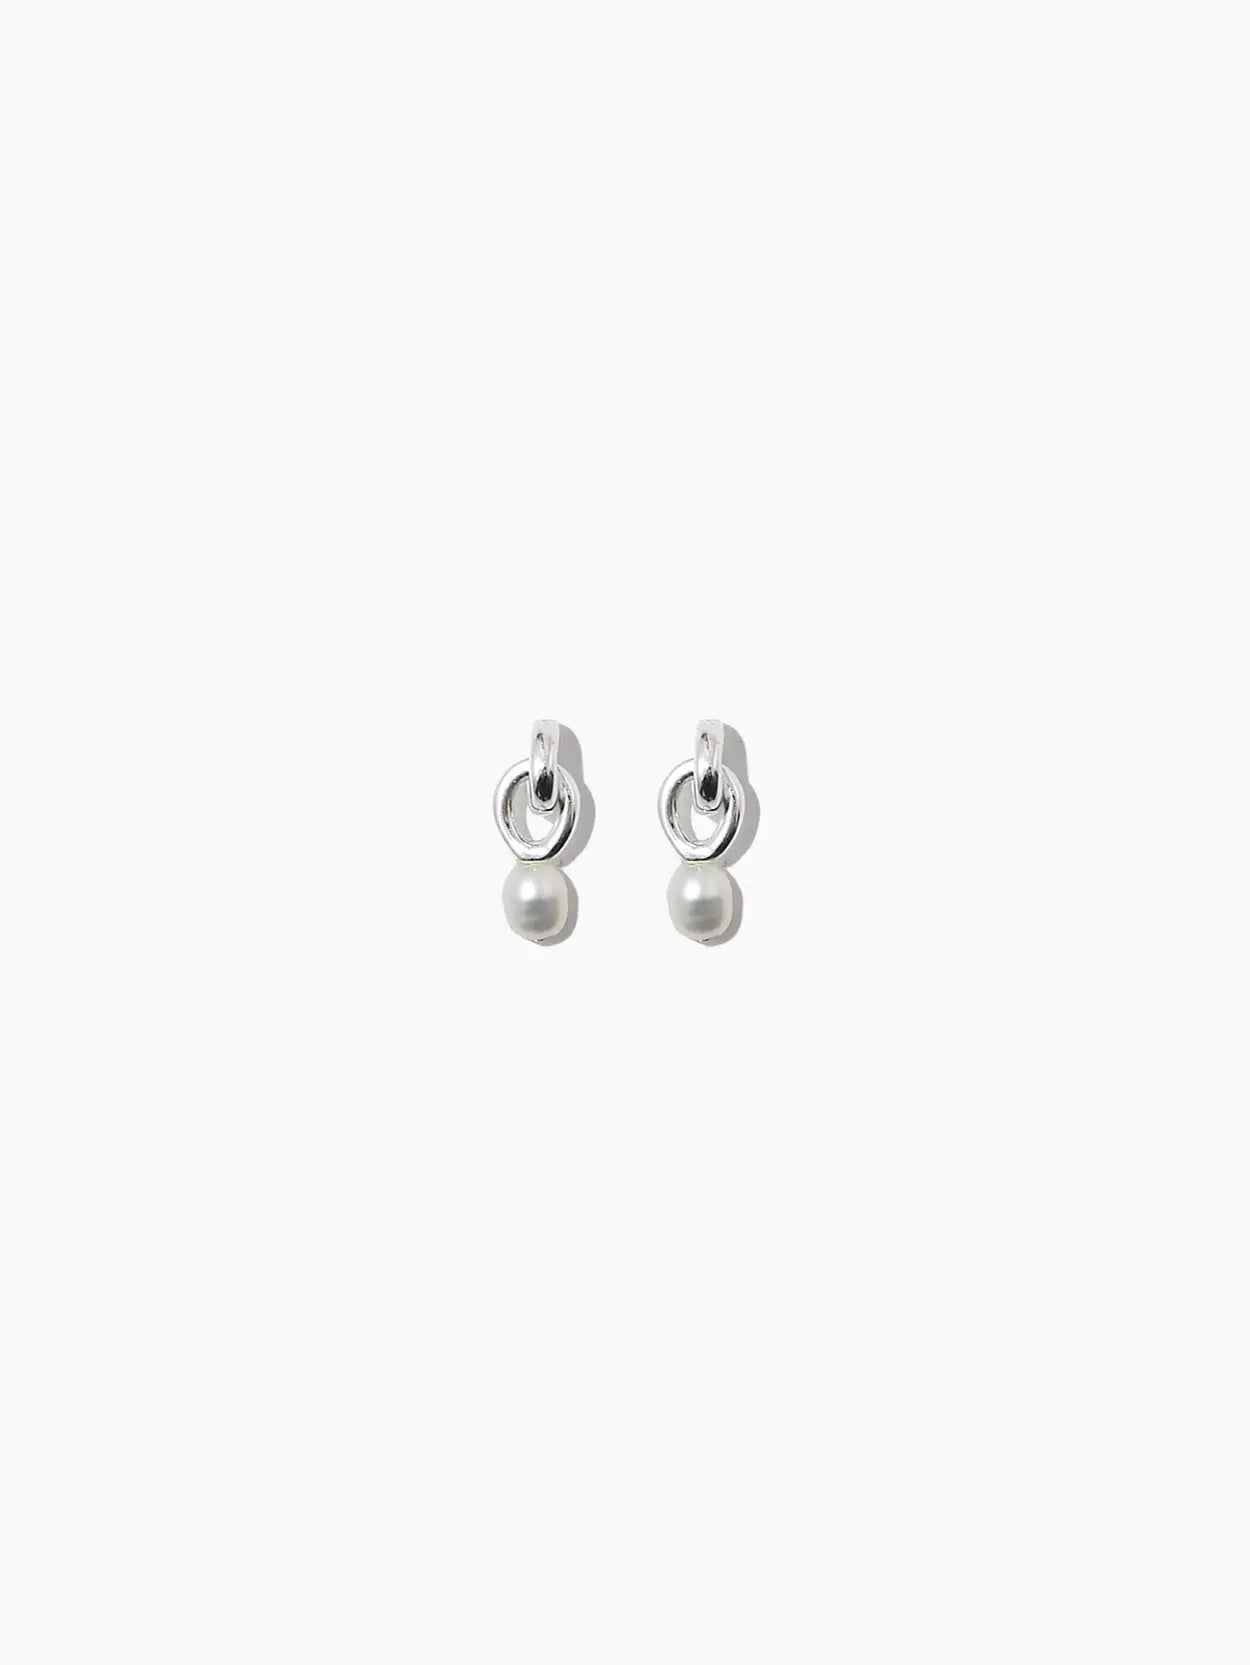 A pair of Mini Sama Pearl Earrings from Nathalie Schreckenberg, featuring a small circular ring at the top and a spherical pearl hanging from each earring. The design is minimalist and sophisticated, echoing Barcelona's timeless style. The background is white.